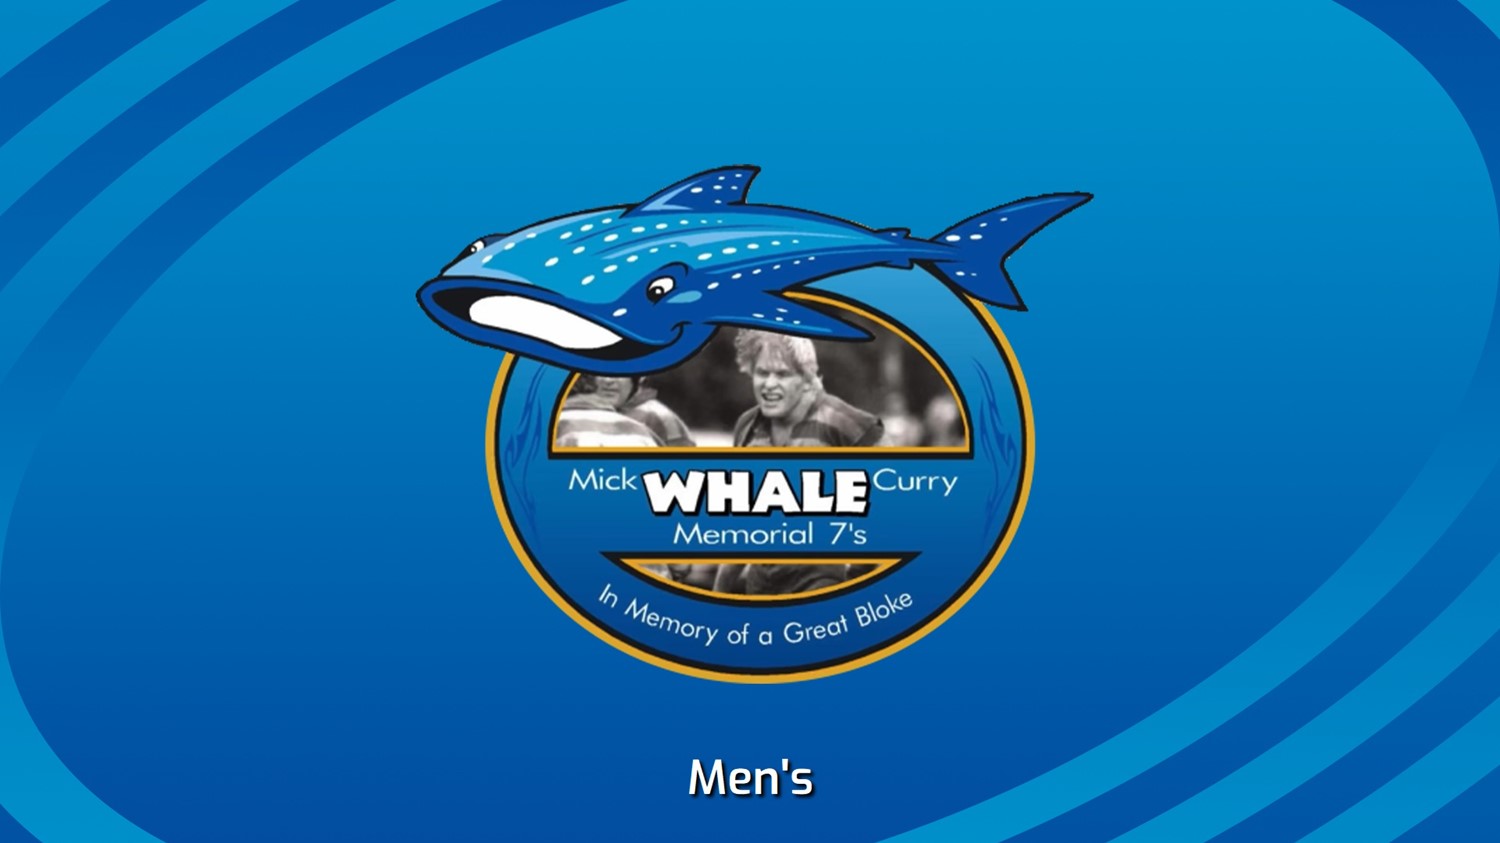 240210-Mick "Whale" Curry Memorial Rugby Sevens Semi-Final - Men's - Warringah v Warnervale Minigame Slate Image